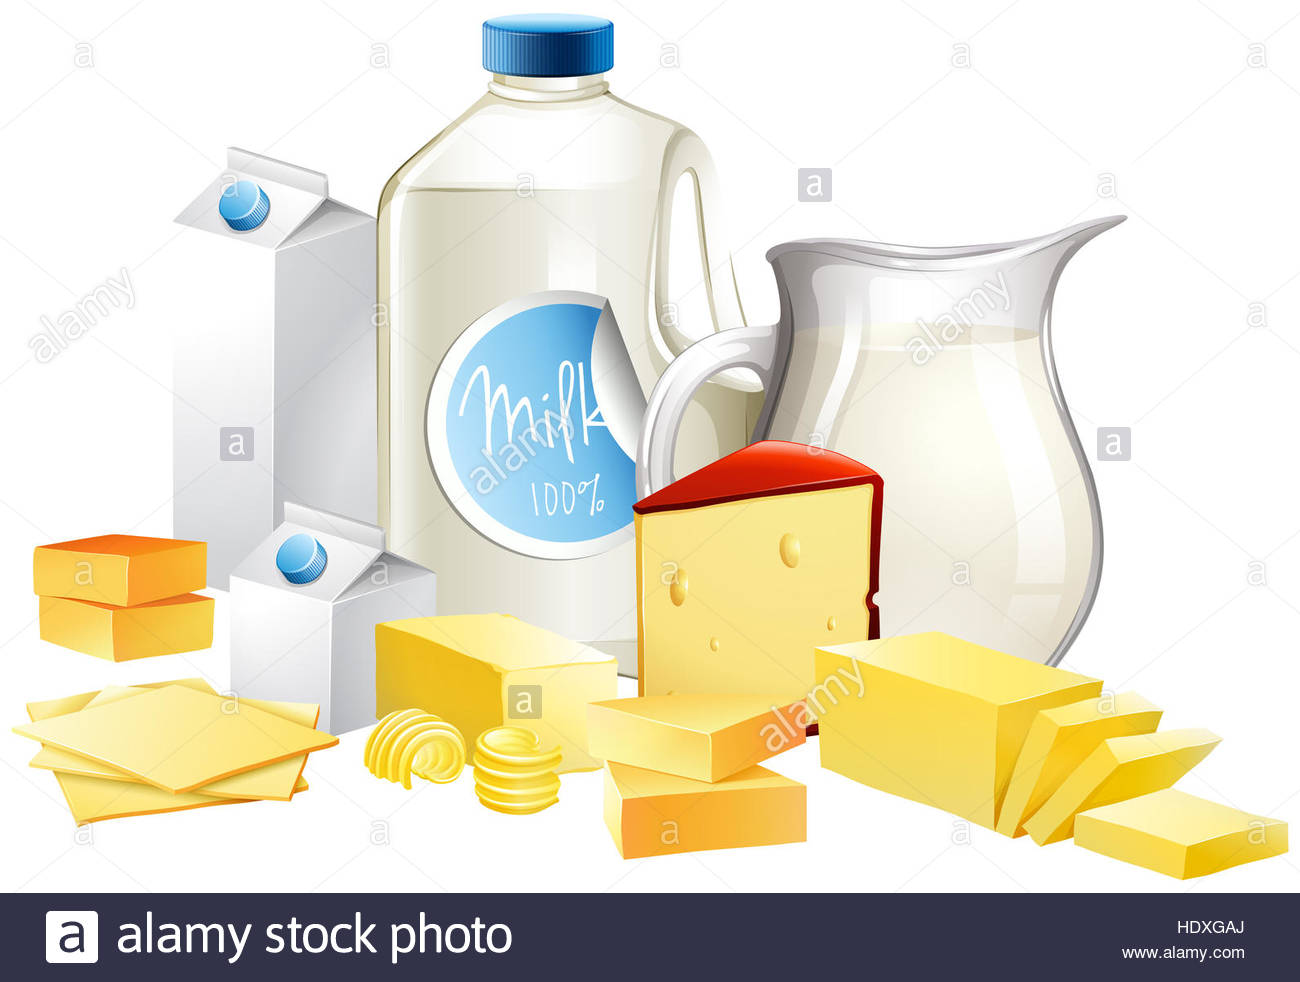 Clipart Dairy Stock Photos & Clipart Dairy Stock Images.